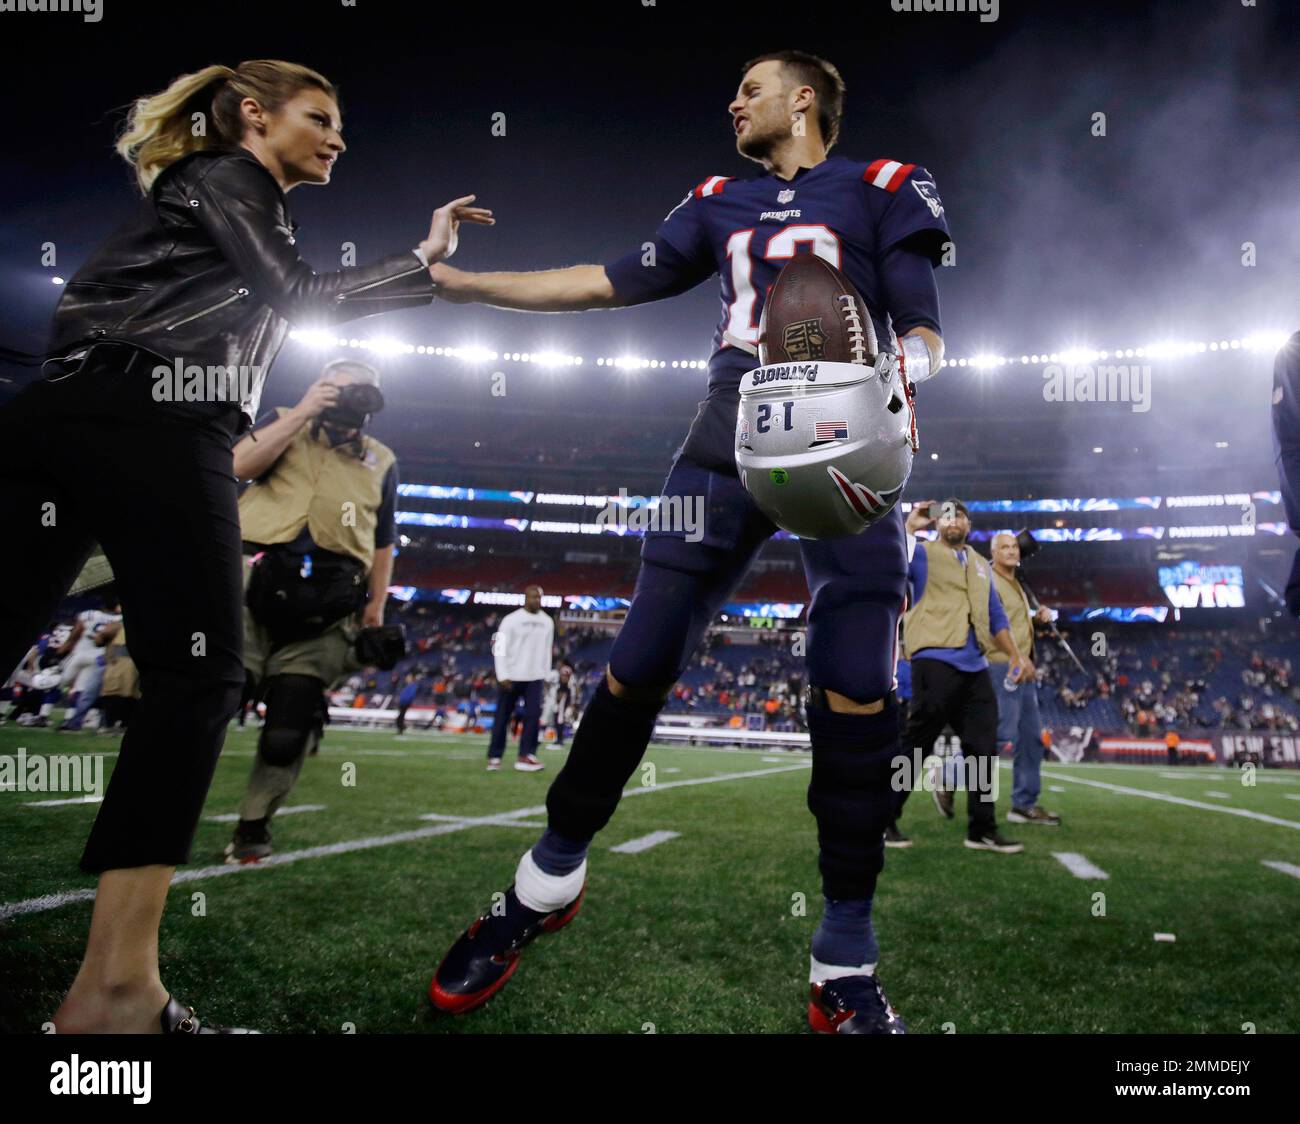 Fox Sports Network broadcaster Erin Andrews, left, speaks to New England  Patriots quarterback Tom Brady after an NFL football game against the  Indianapolis Colts, Thursday, Oct. 4, 2018, in Foxborough, Mass. (AP